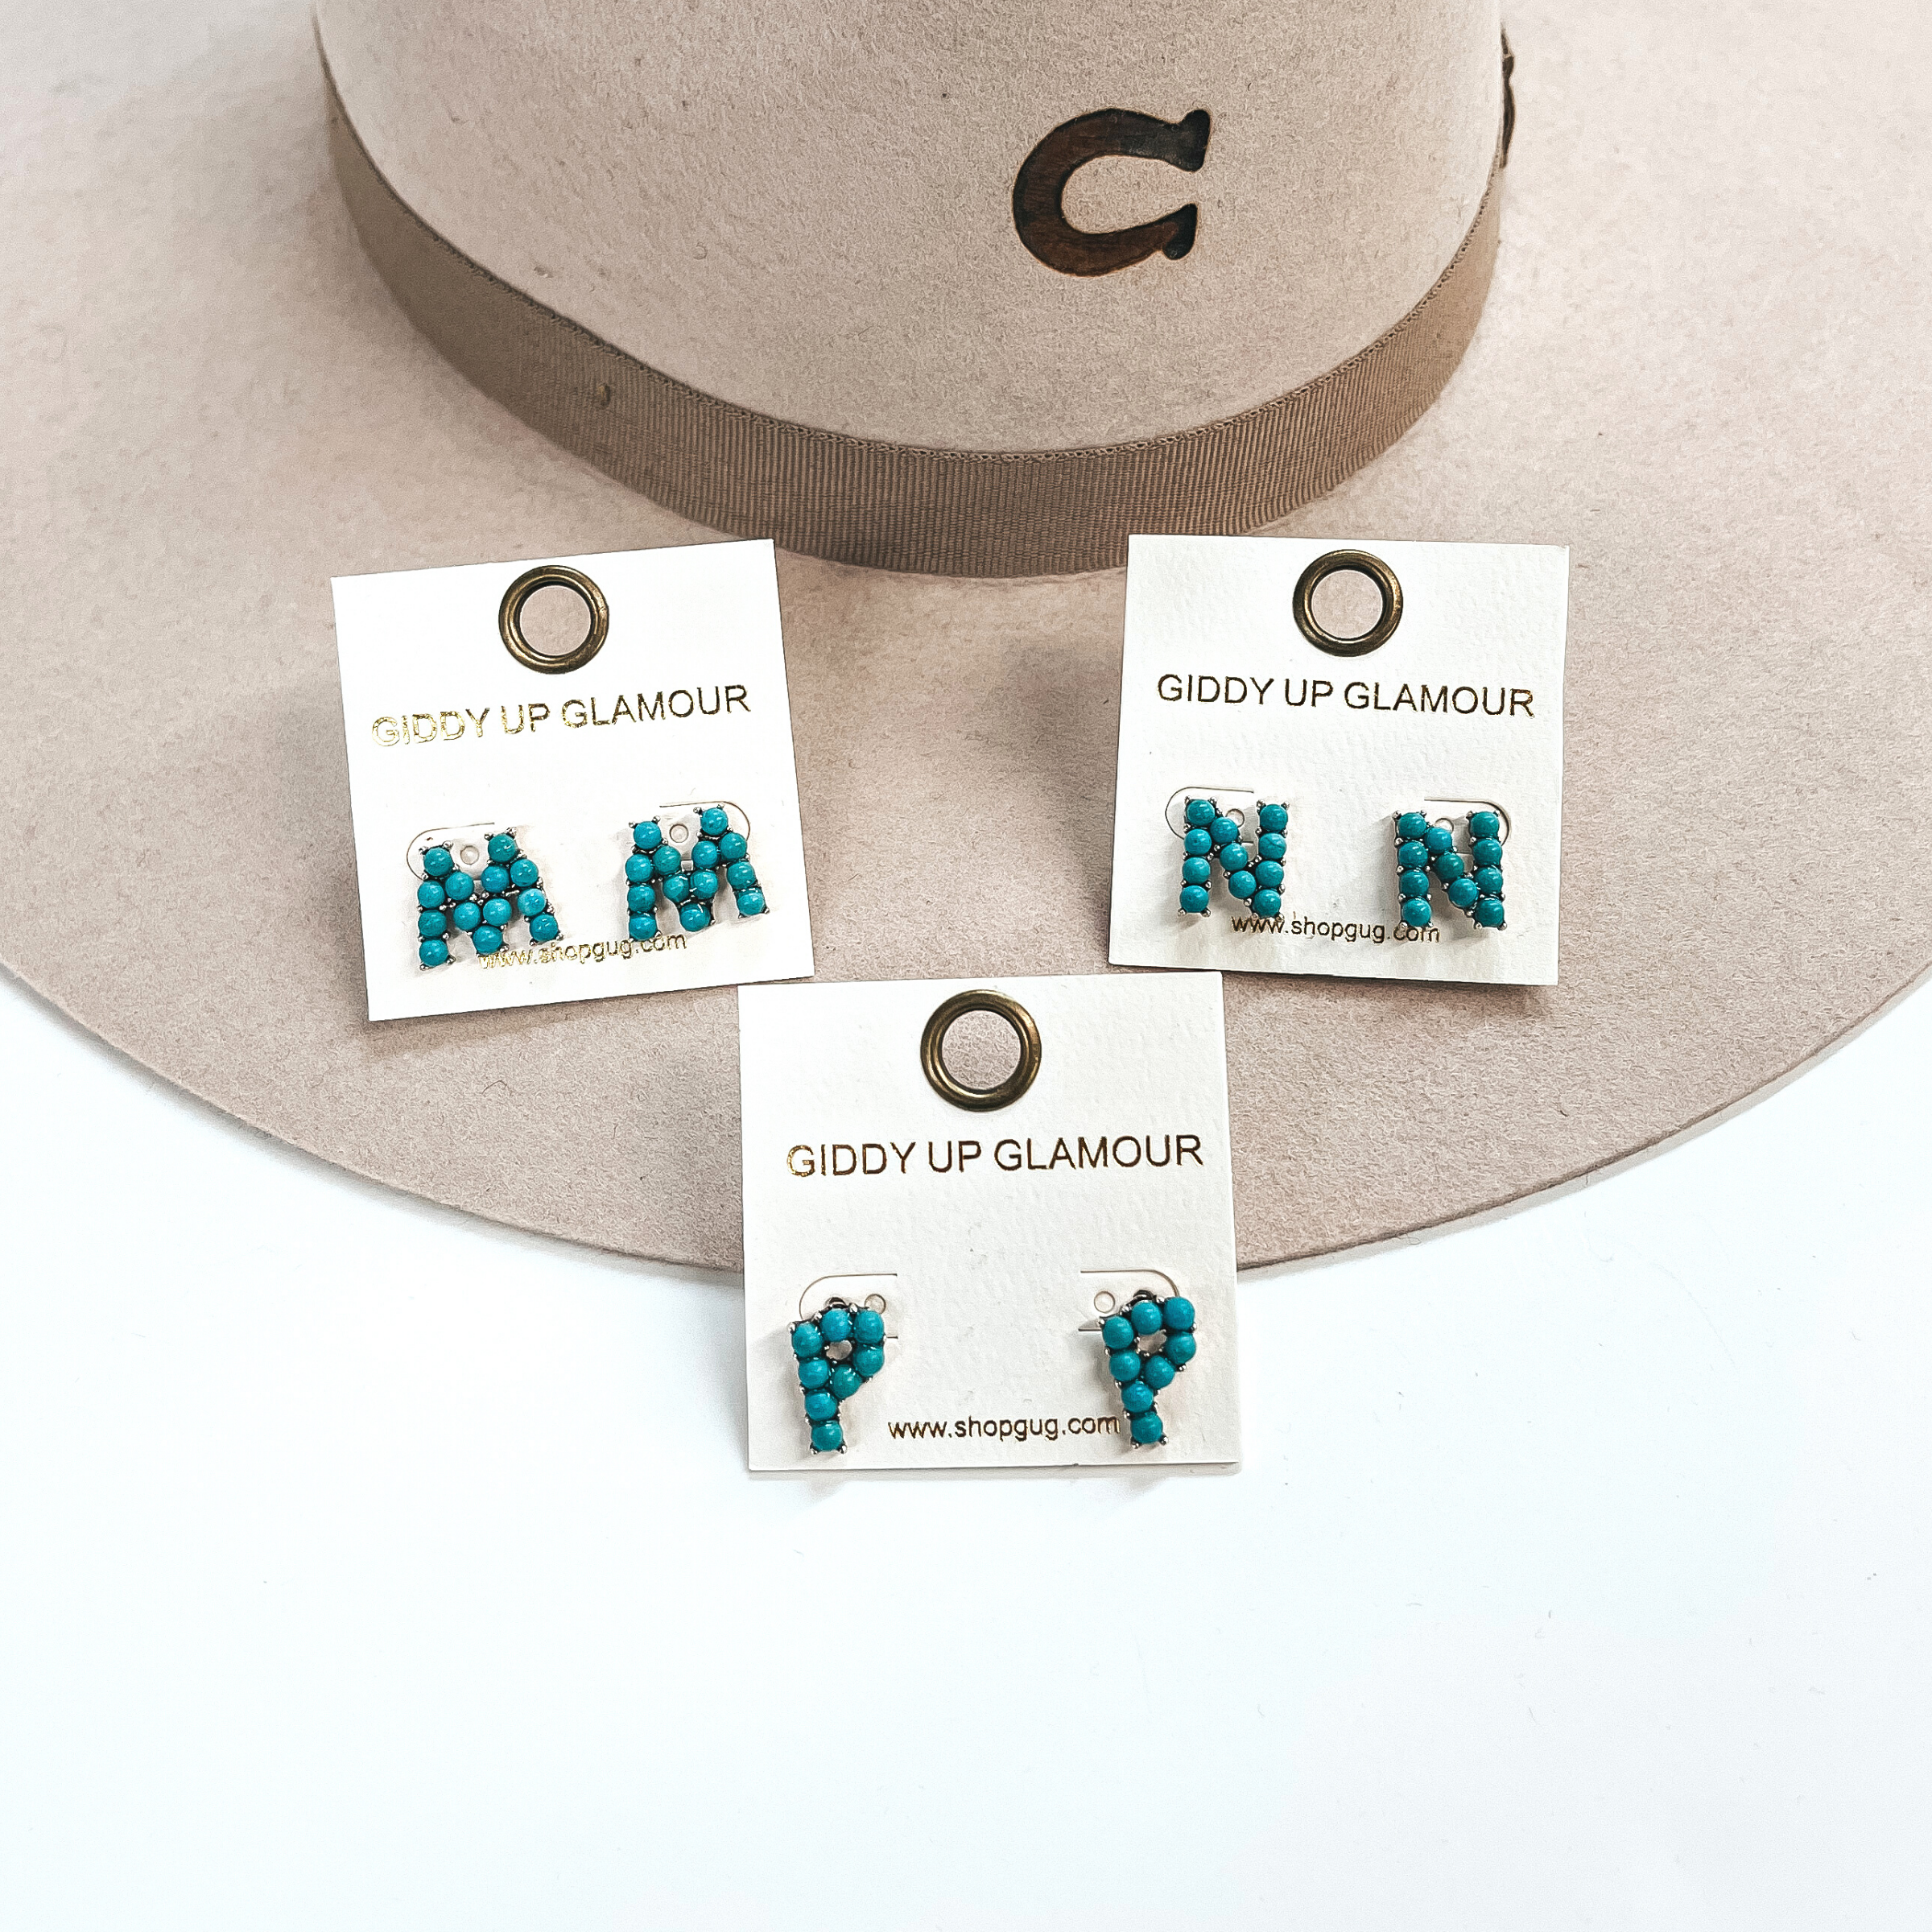 These are three pair of initial earrings with small turquoise stones in  a silver setting. From left to right; M,P,N. These earrings are placed  on a white Giddy Up Glamour card, they are laying on a beige, felt,  Charlie 1 Horse hat and on a white background.